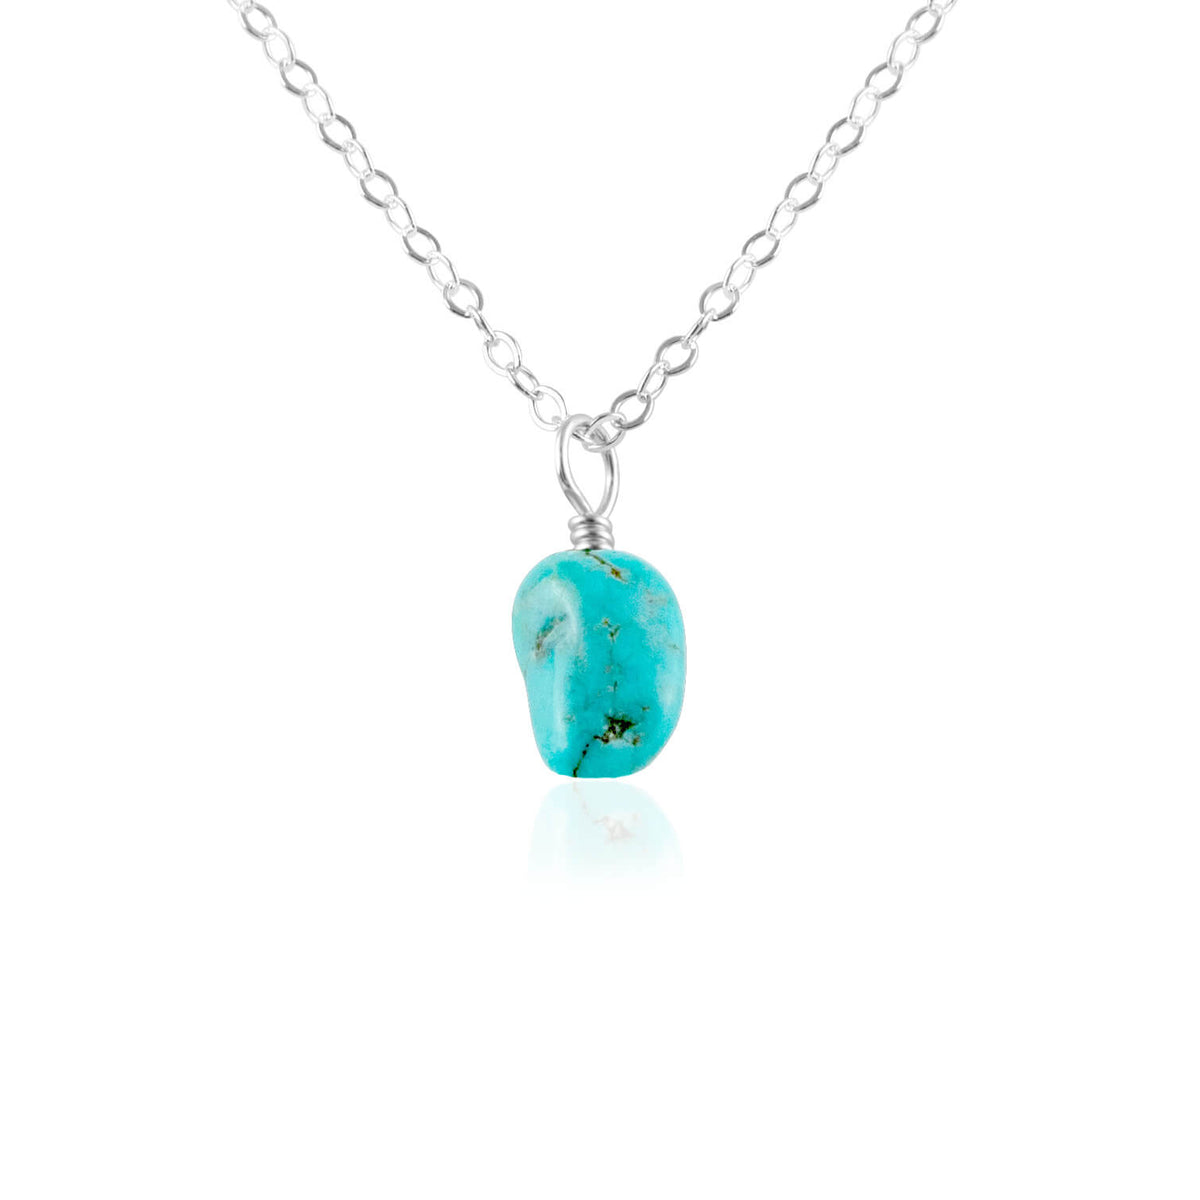 Raw Crystal Pendant Necklace - Turquoise - Sterling Silver - Luna Tide Handmade Jewellery